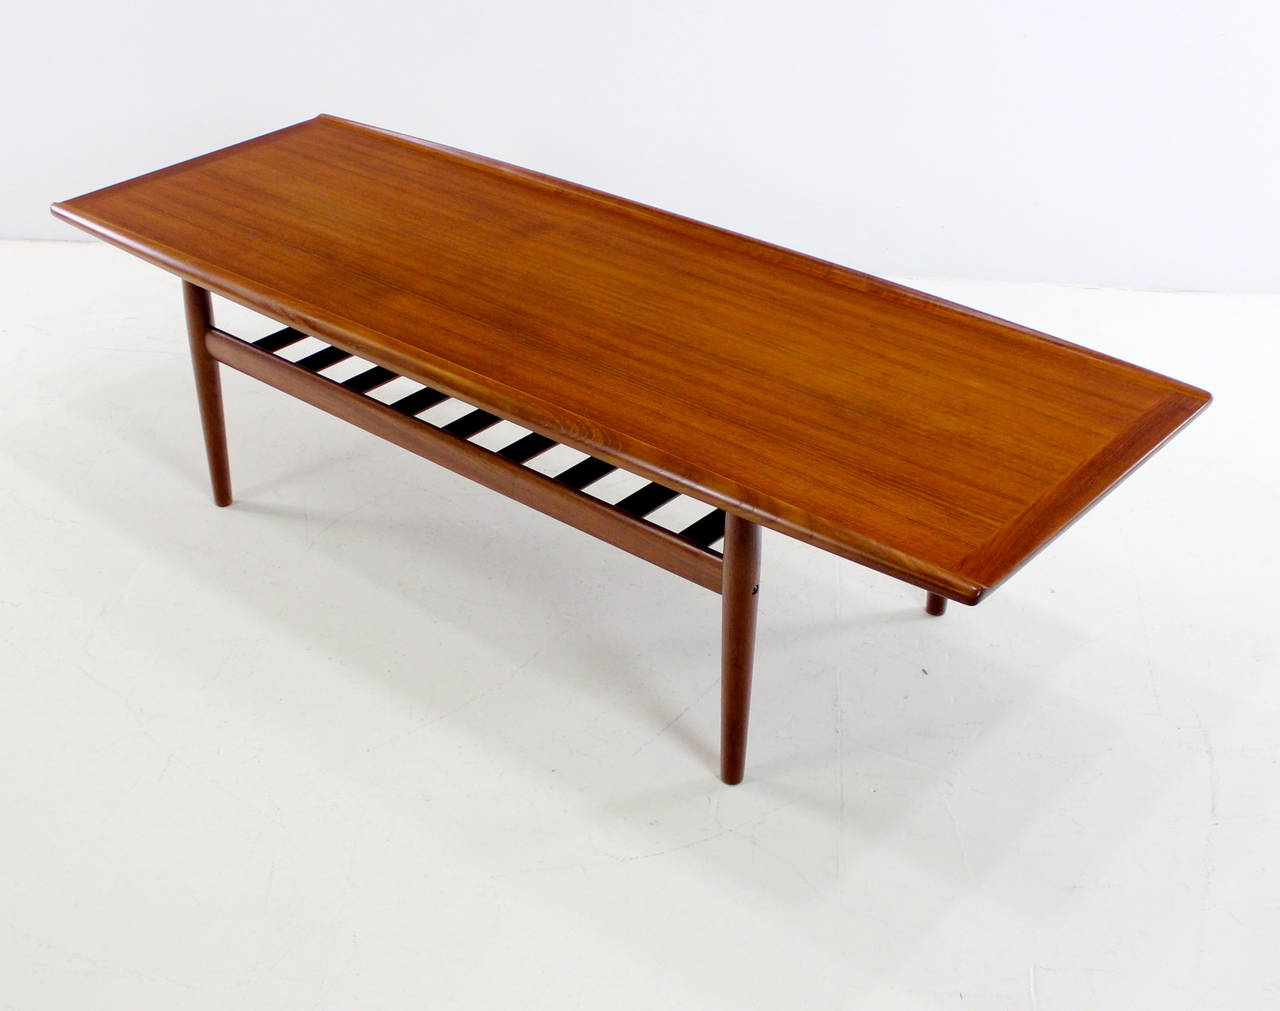 Danish modern coffee table designed by Grete Jalk.
Solid teak.
Superior Jalk style and quality with inlaid, upturned table edges and lower slatted magazine shelf.
Professionally restored and refinished by LookModern.
Matchless quality and